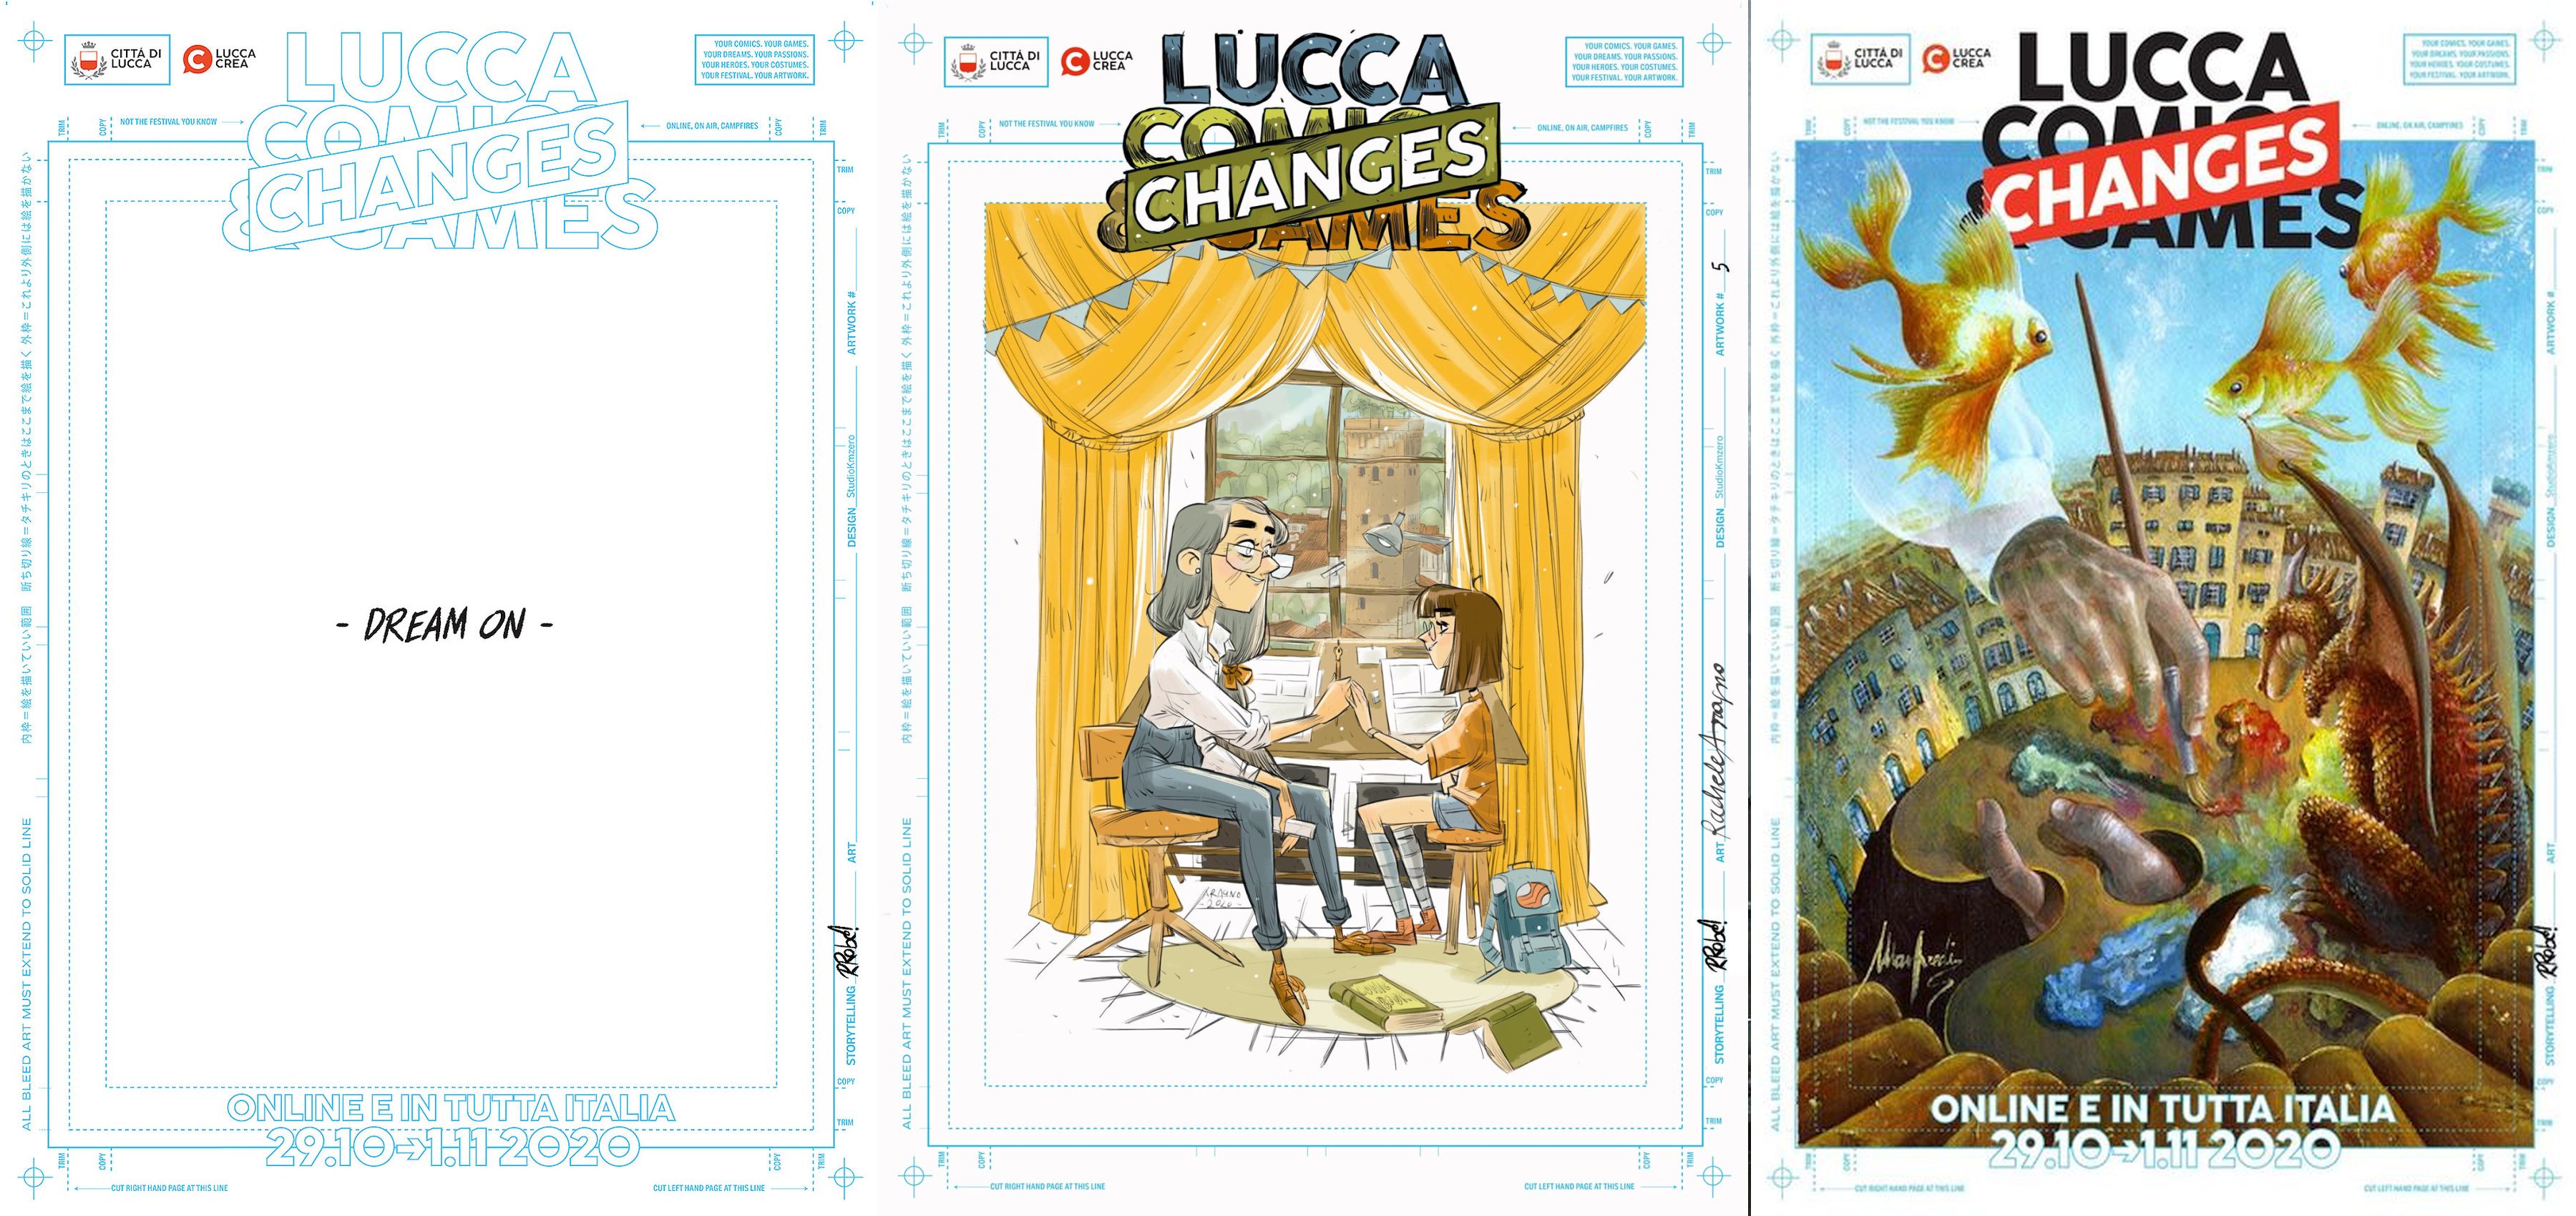 lucca comics and games 2020 poster 